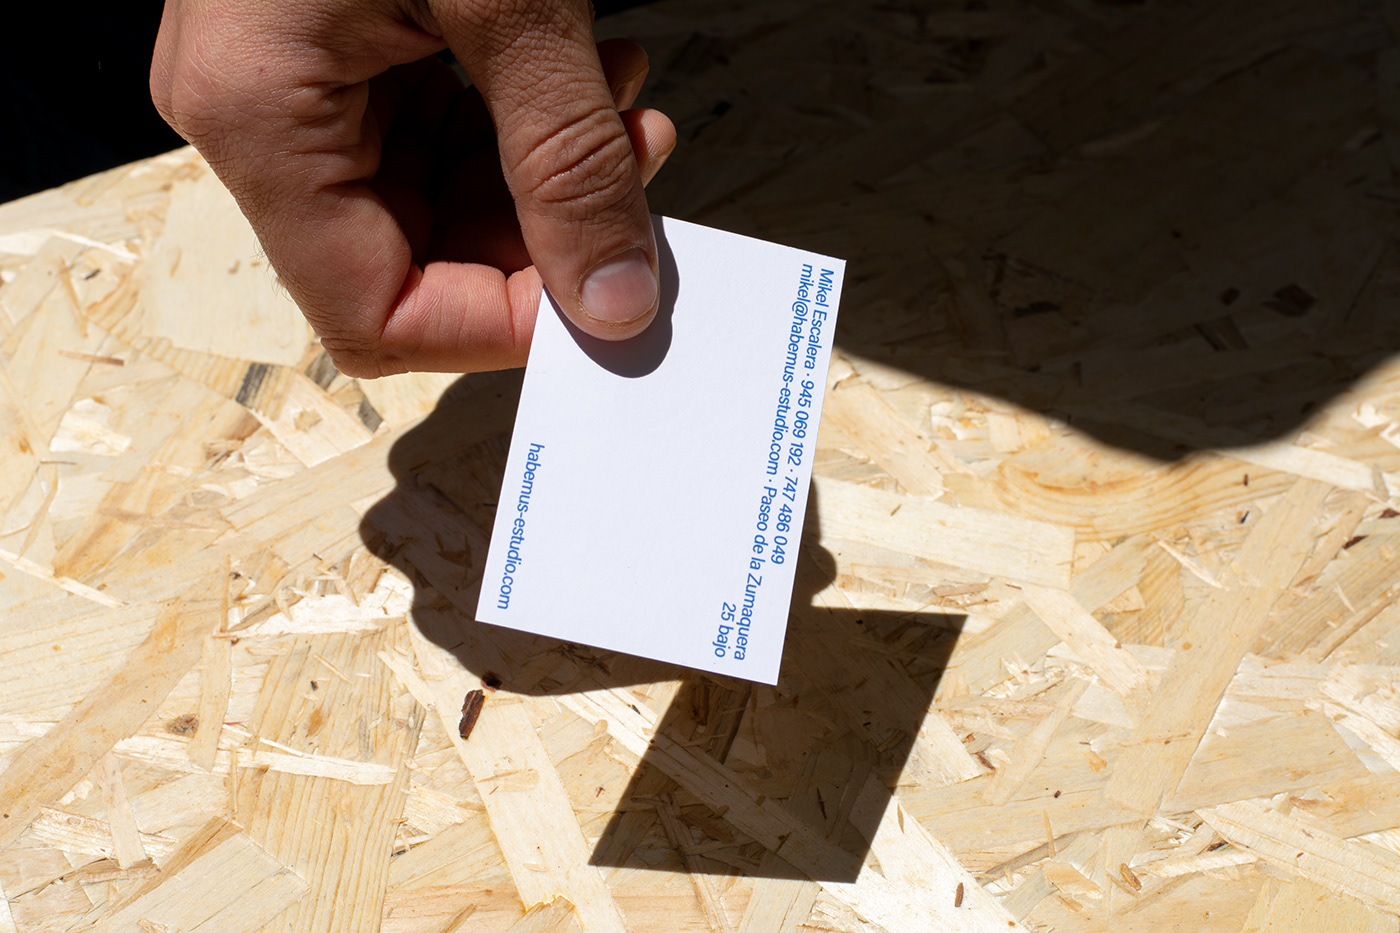 A member of the team handing a business card